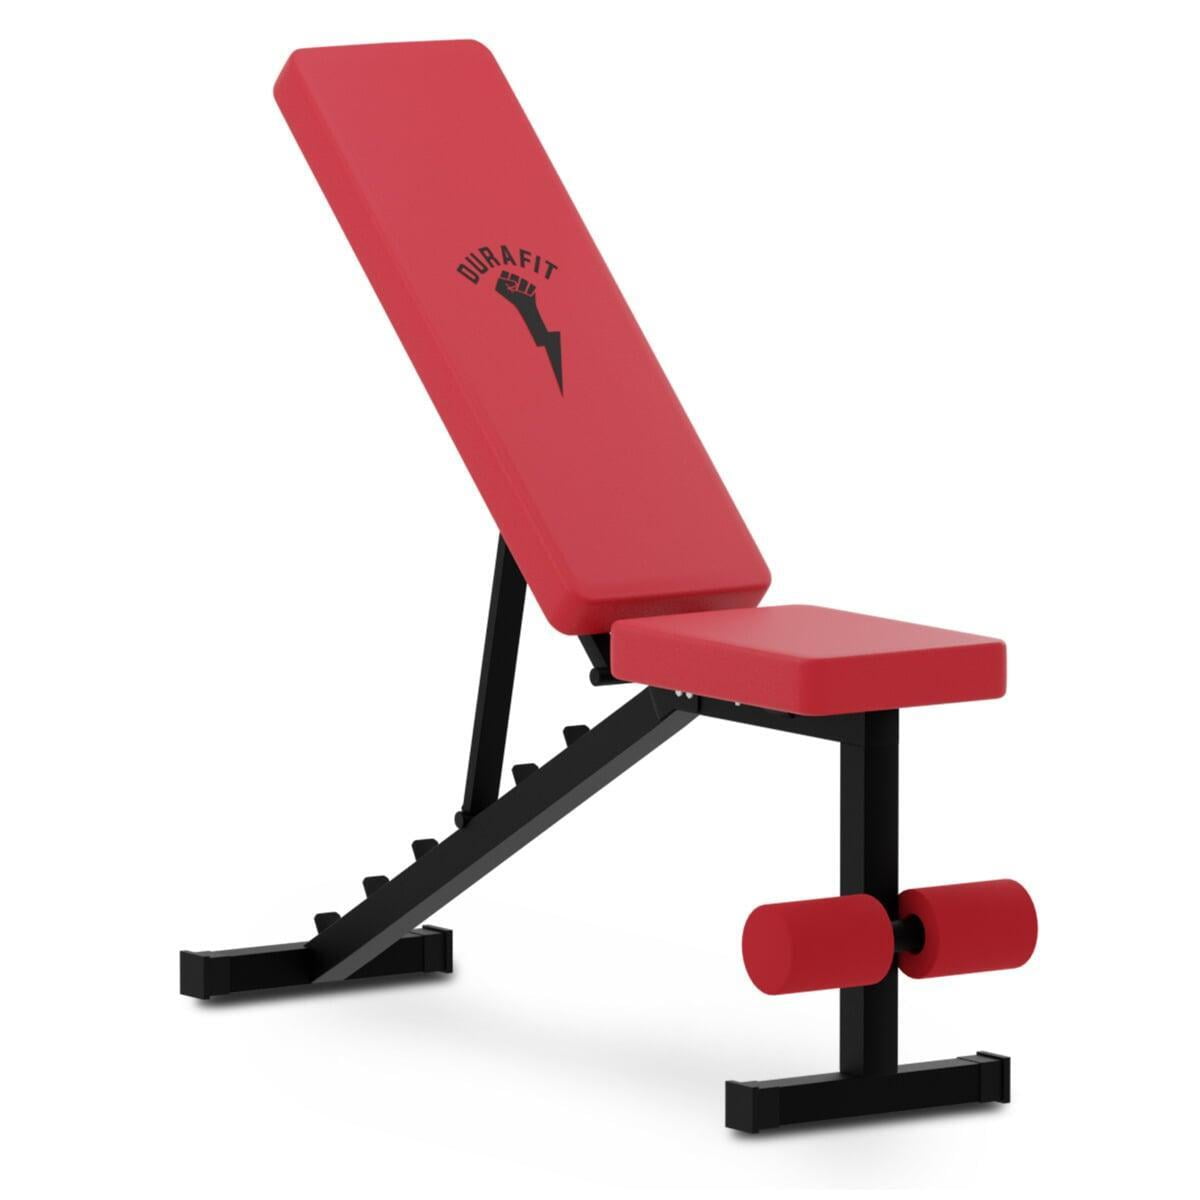 Durafit Foldable Bench Red